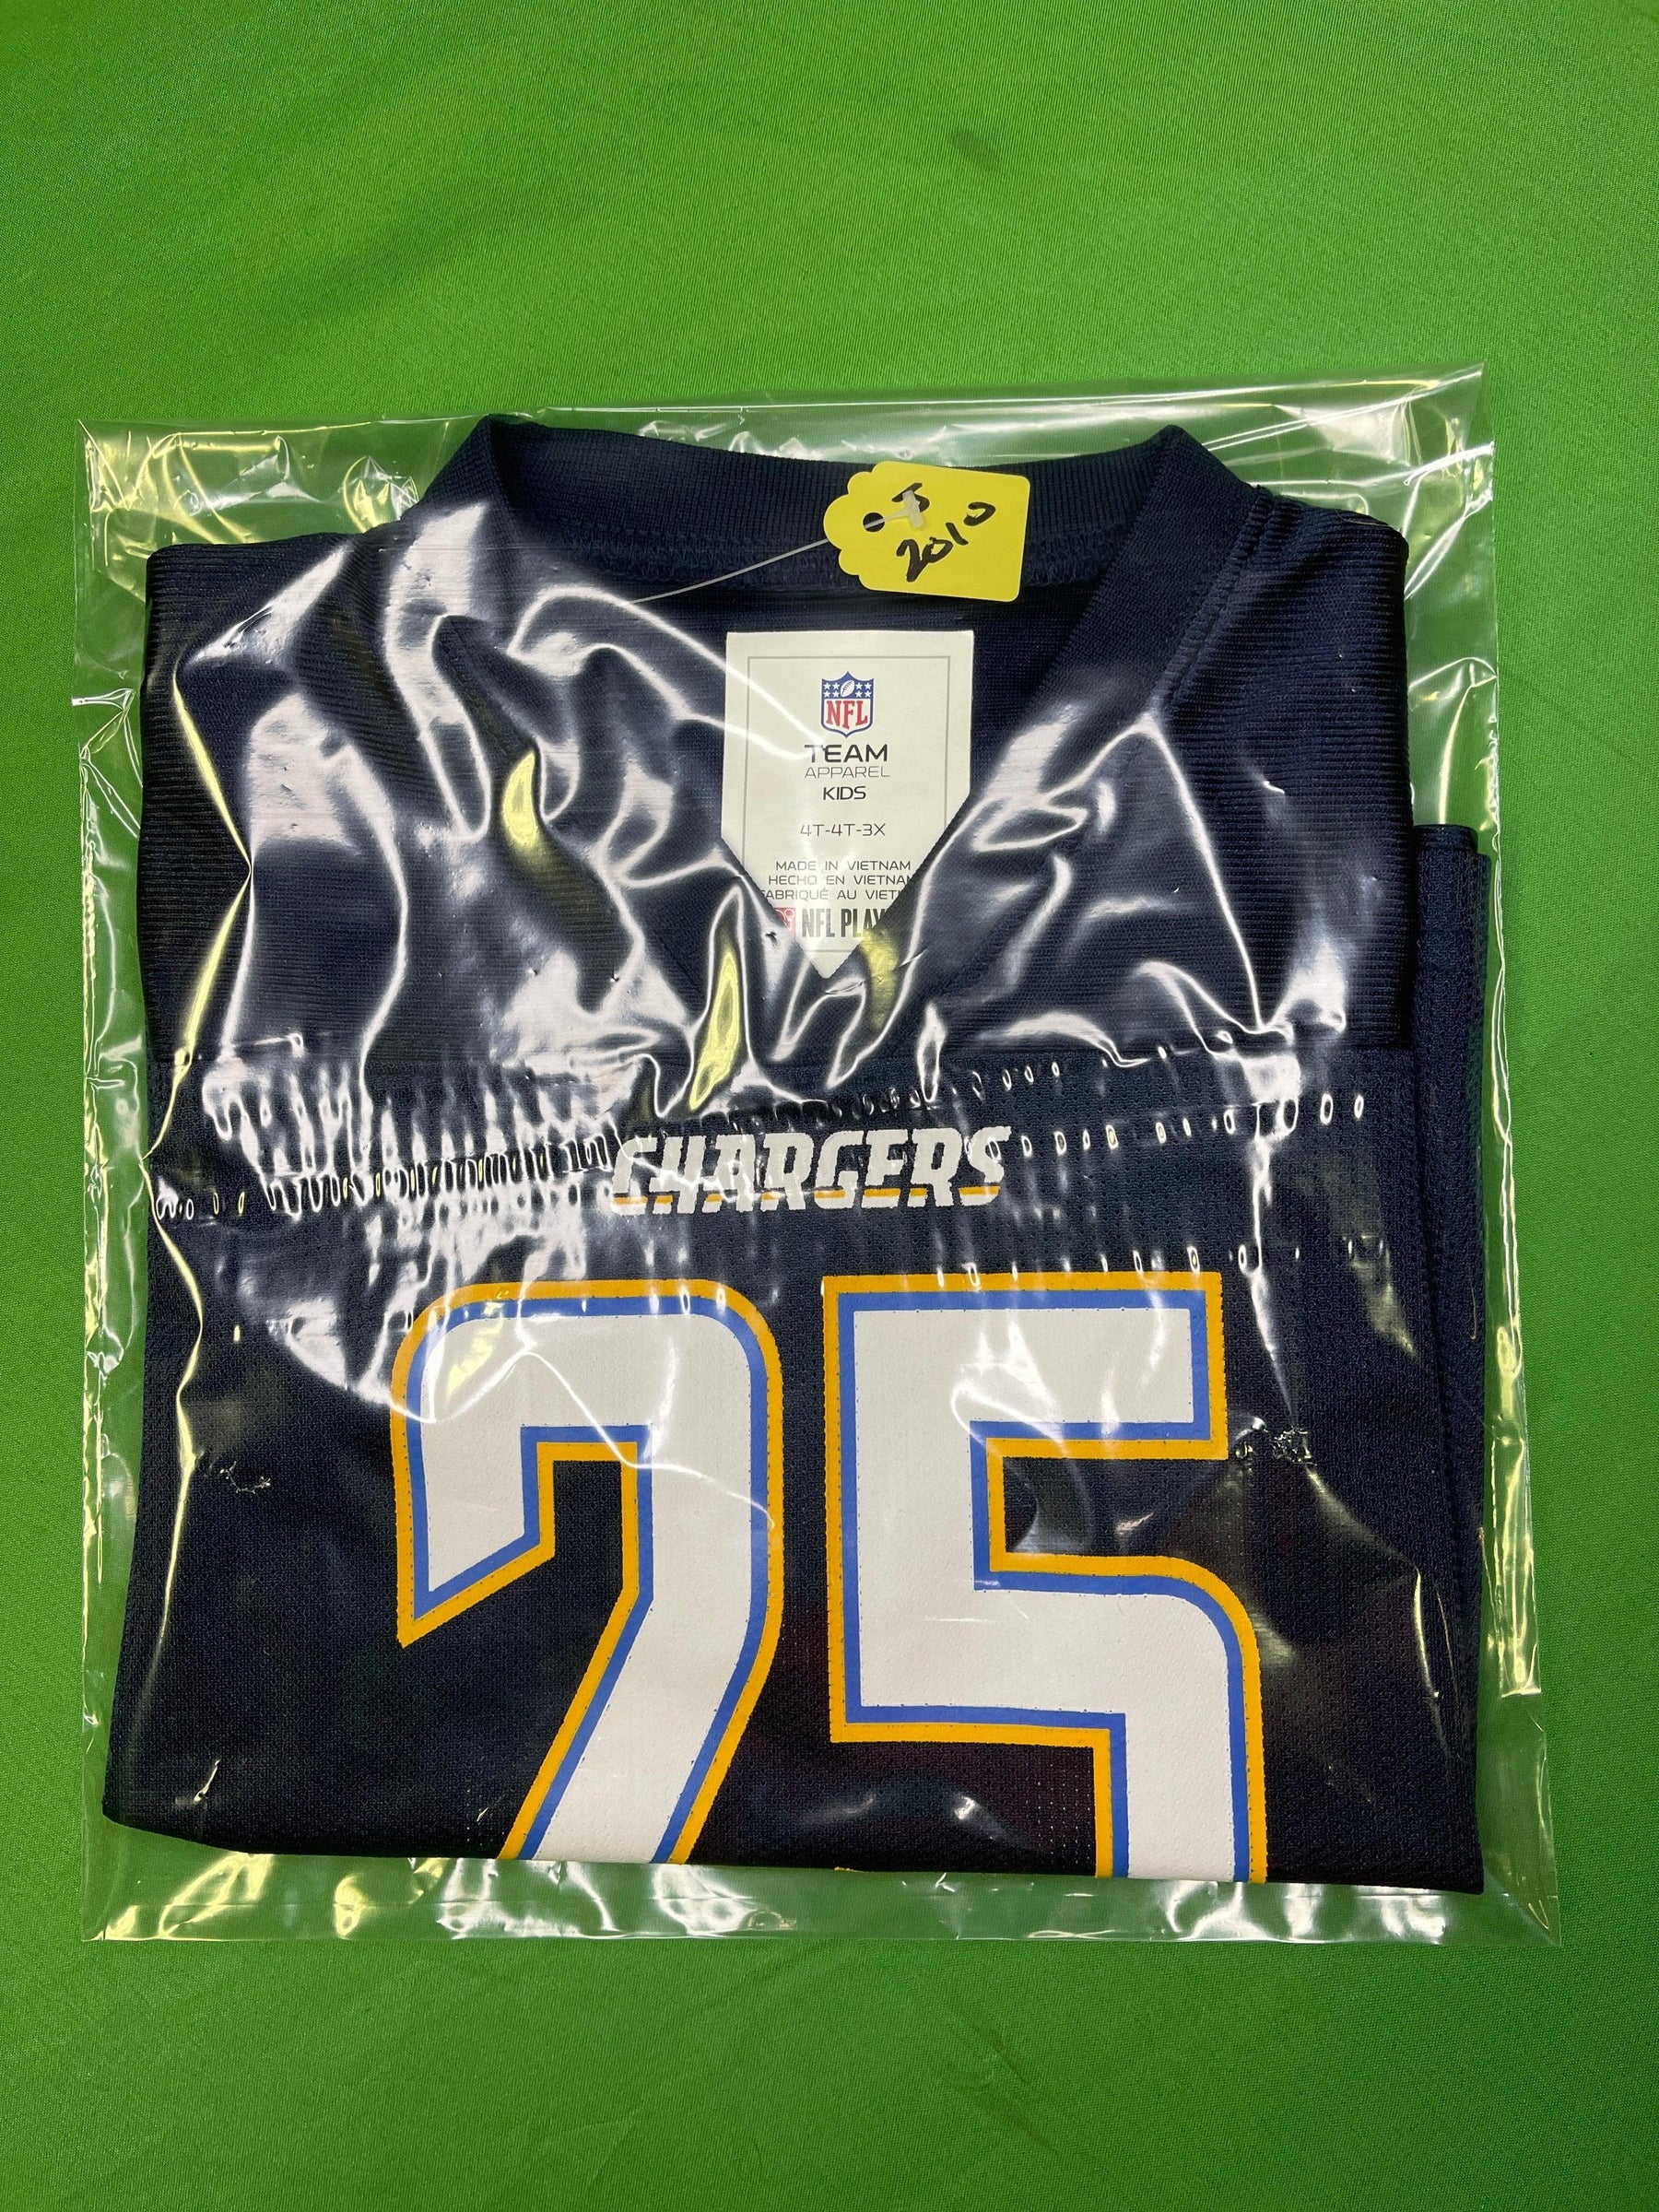 NFL Los Angeles Chargers Melvin Gordon #25 Jersey Toddler 4T